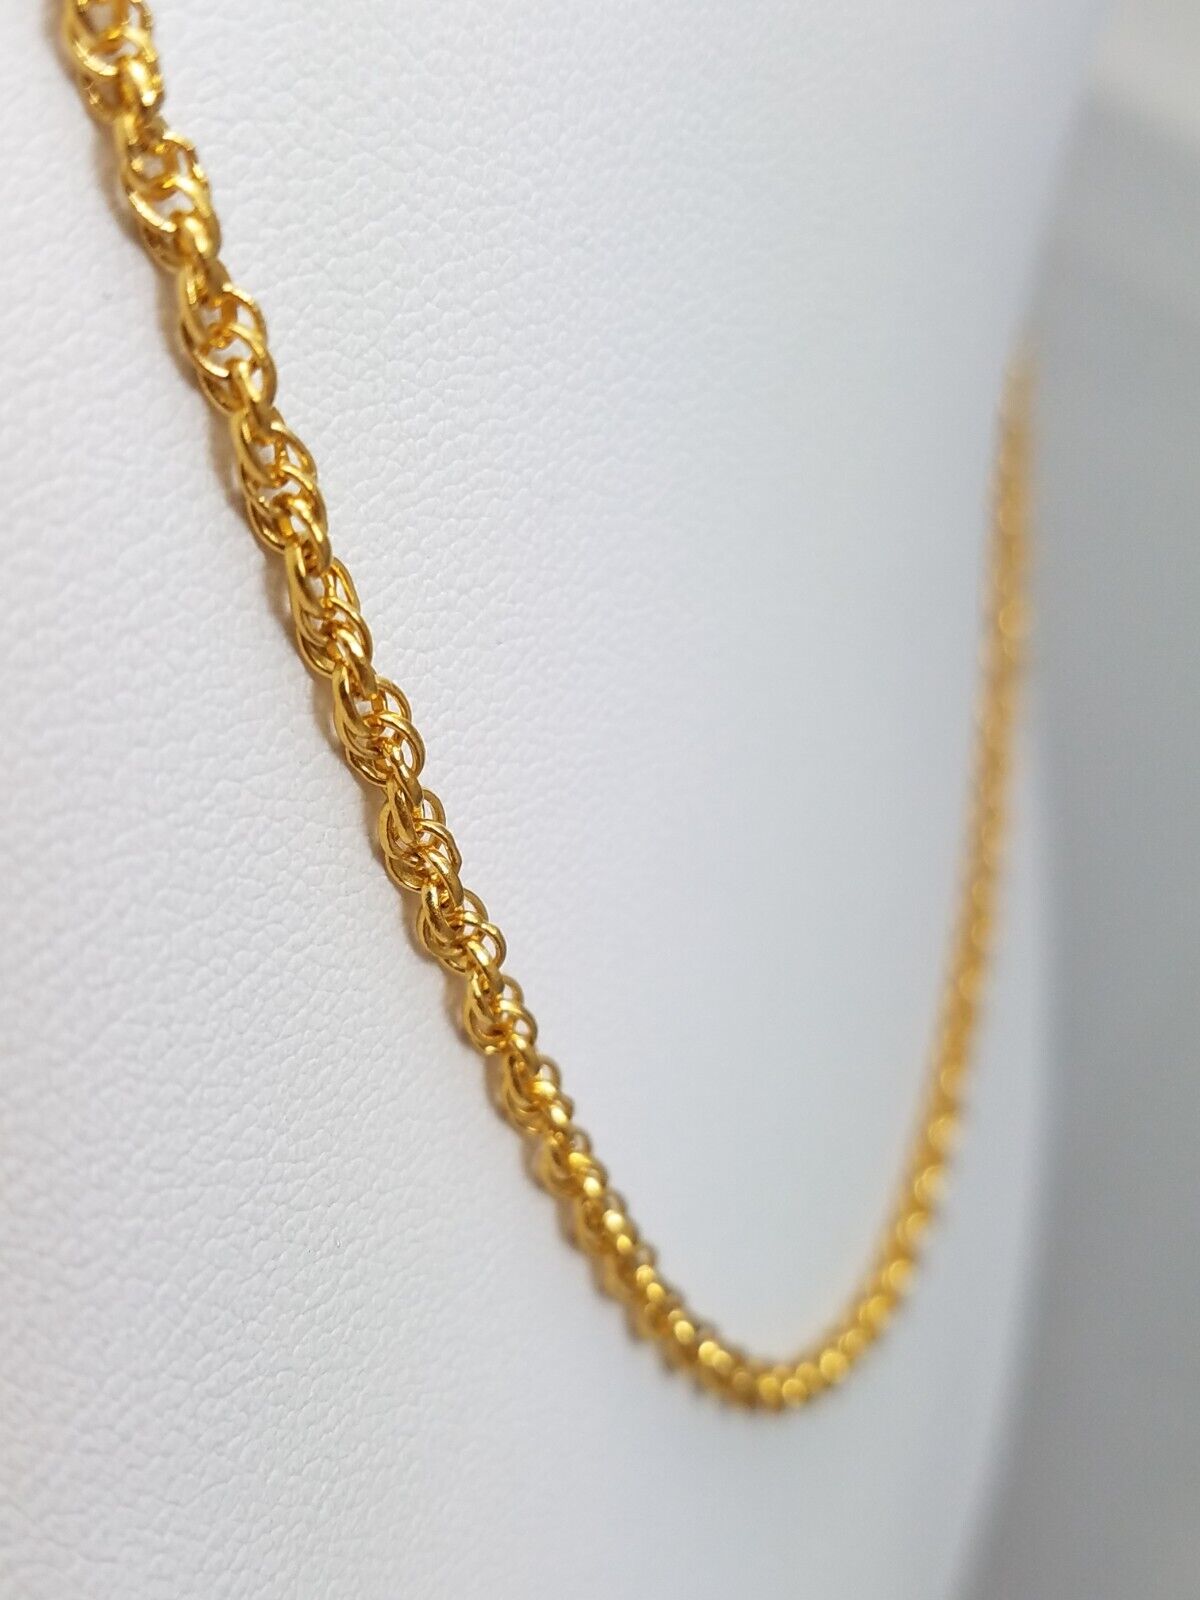 16" 24k Solid Yellow Gold Link Chain Necklace